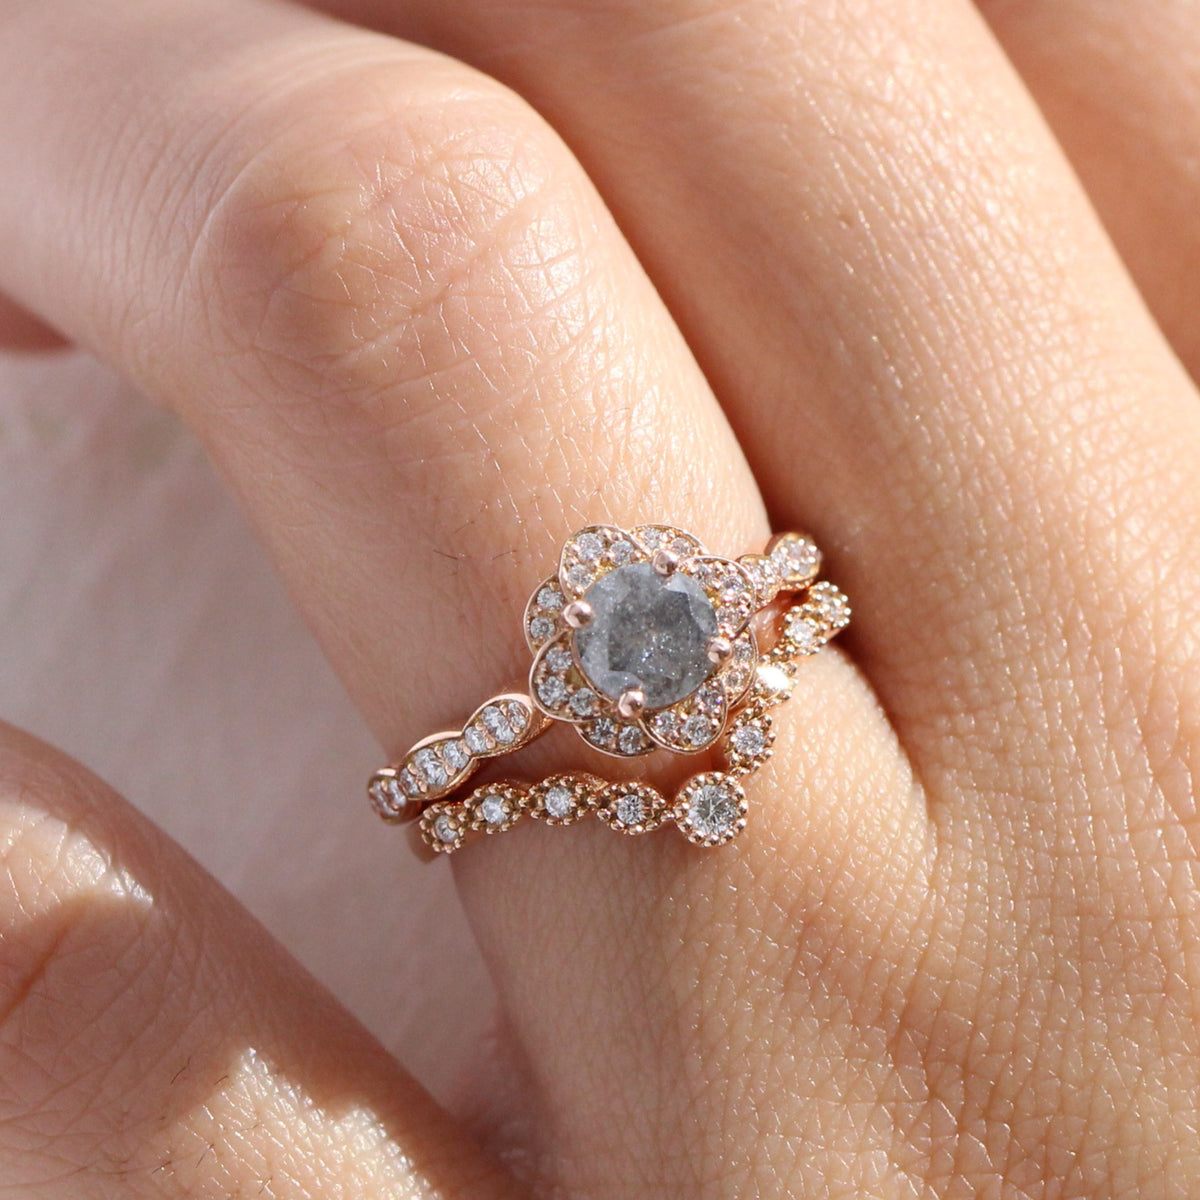 Natural salt and pepper diamond ring rose gold grey diamond vintage halo ring la more design jewelry